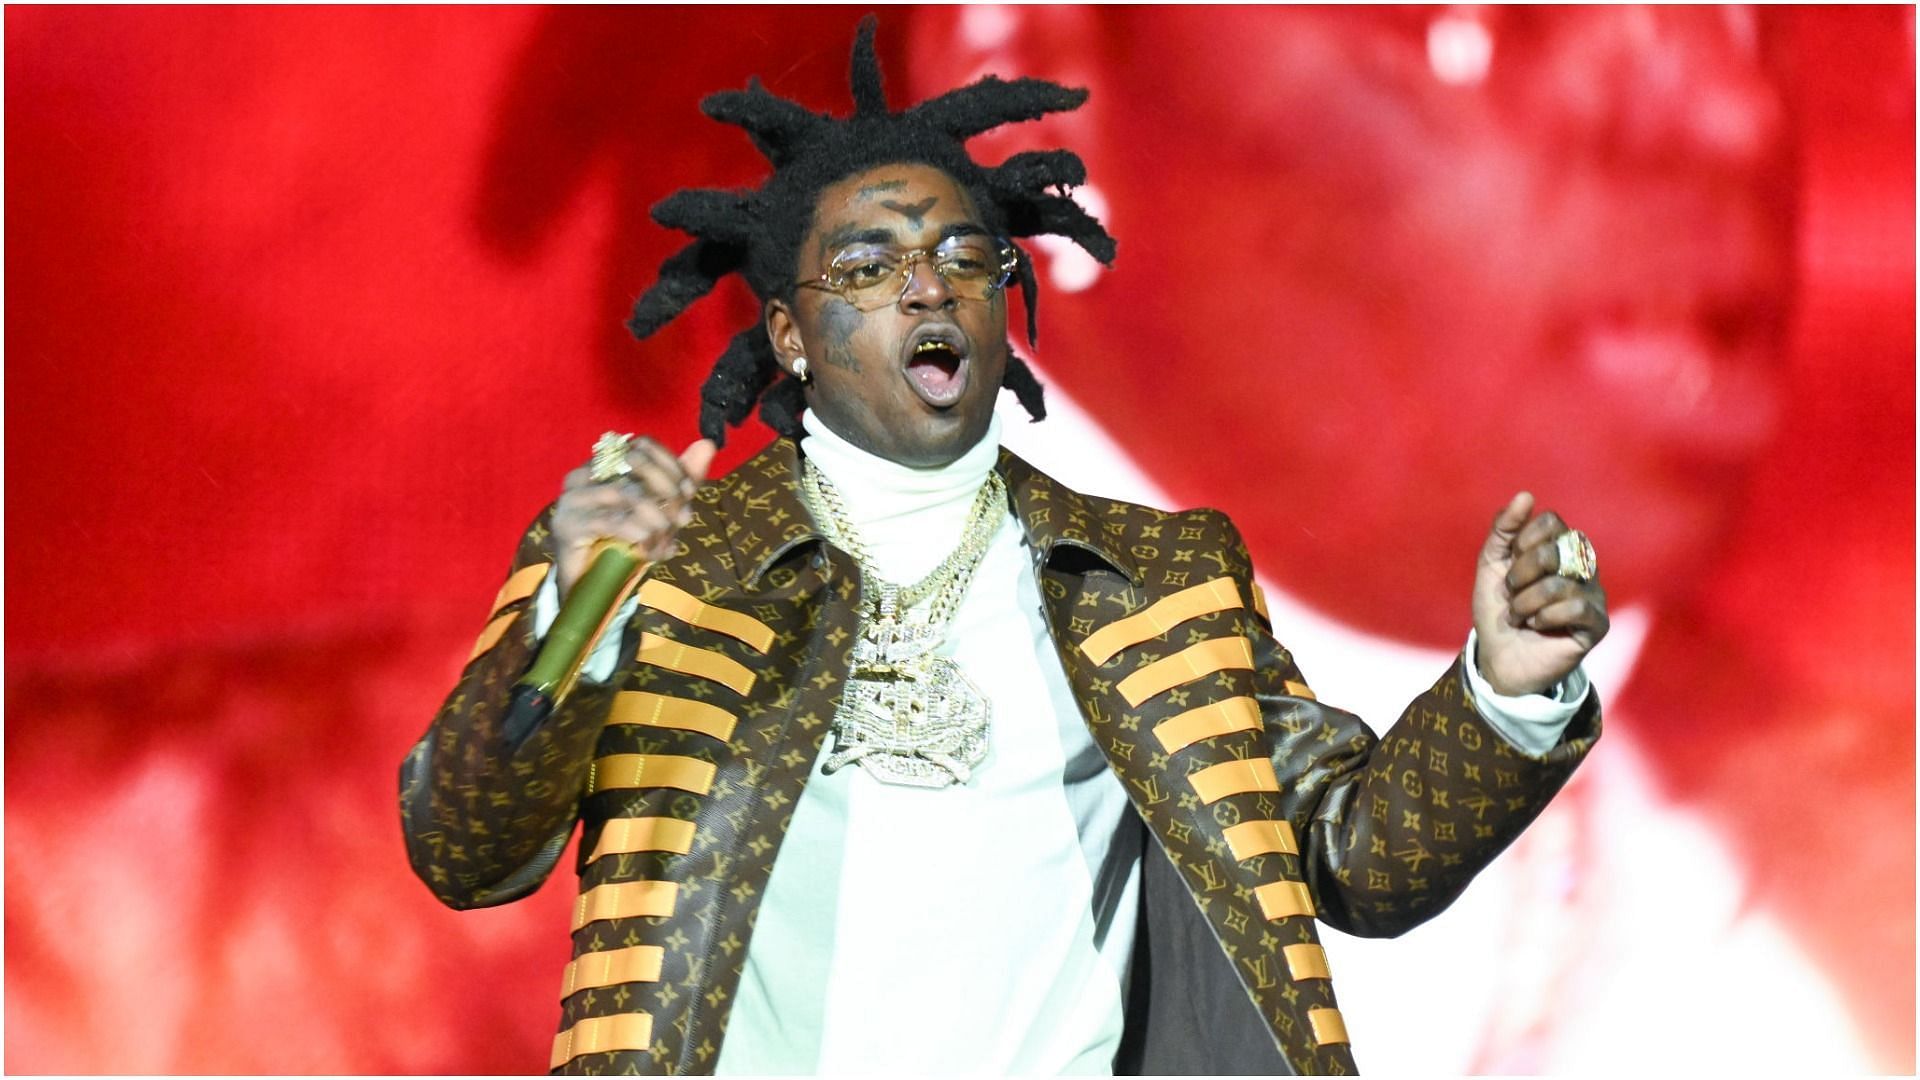 Kodak Black was spotted with a woman at a hockey game (Image via Astrida Valigorsky/Getty Images)